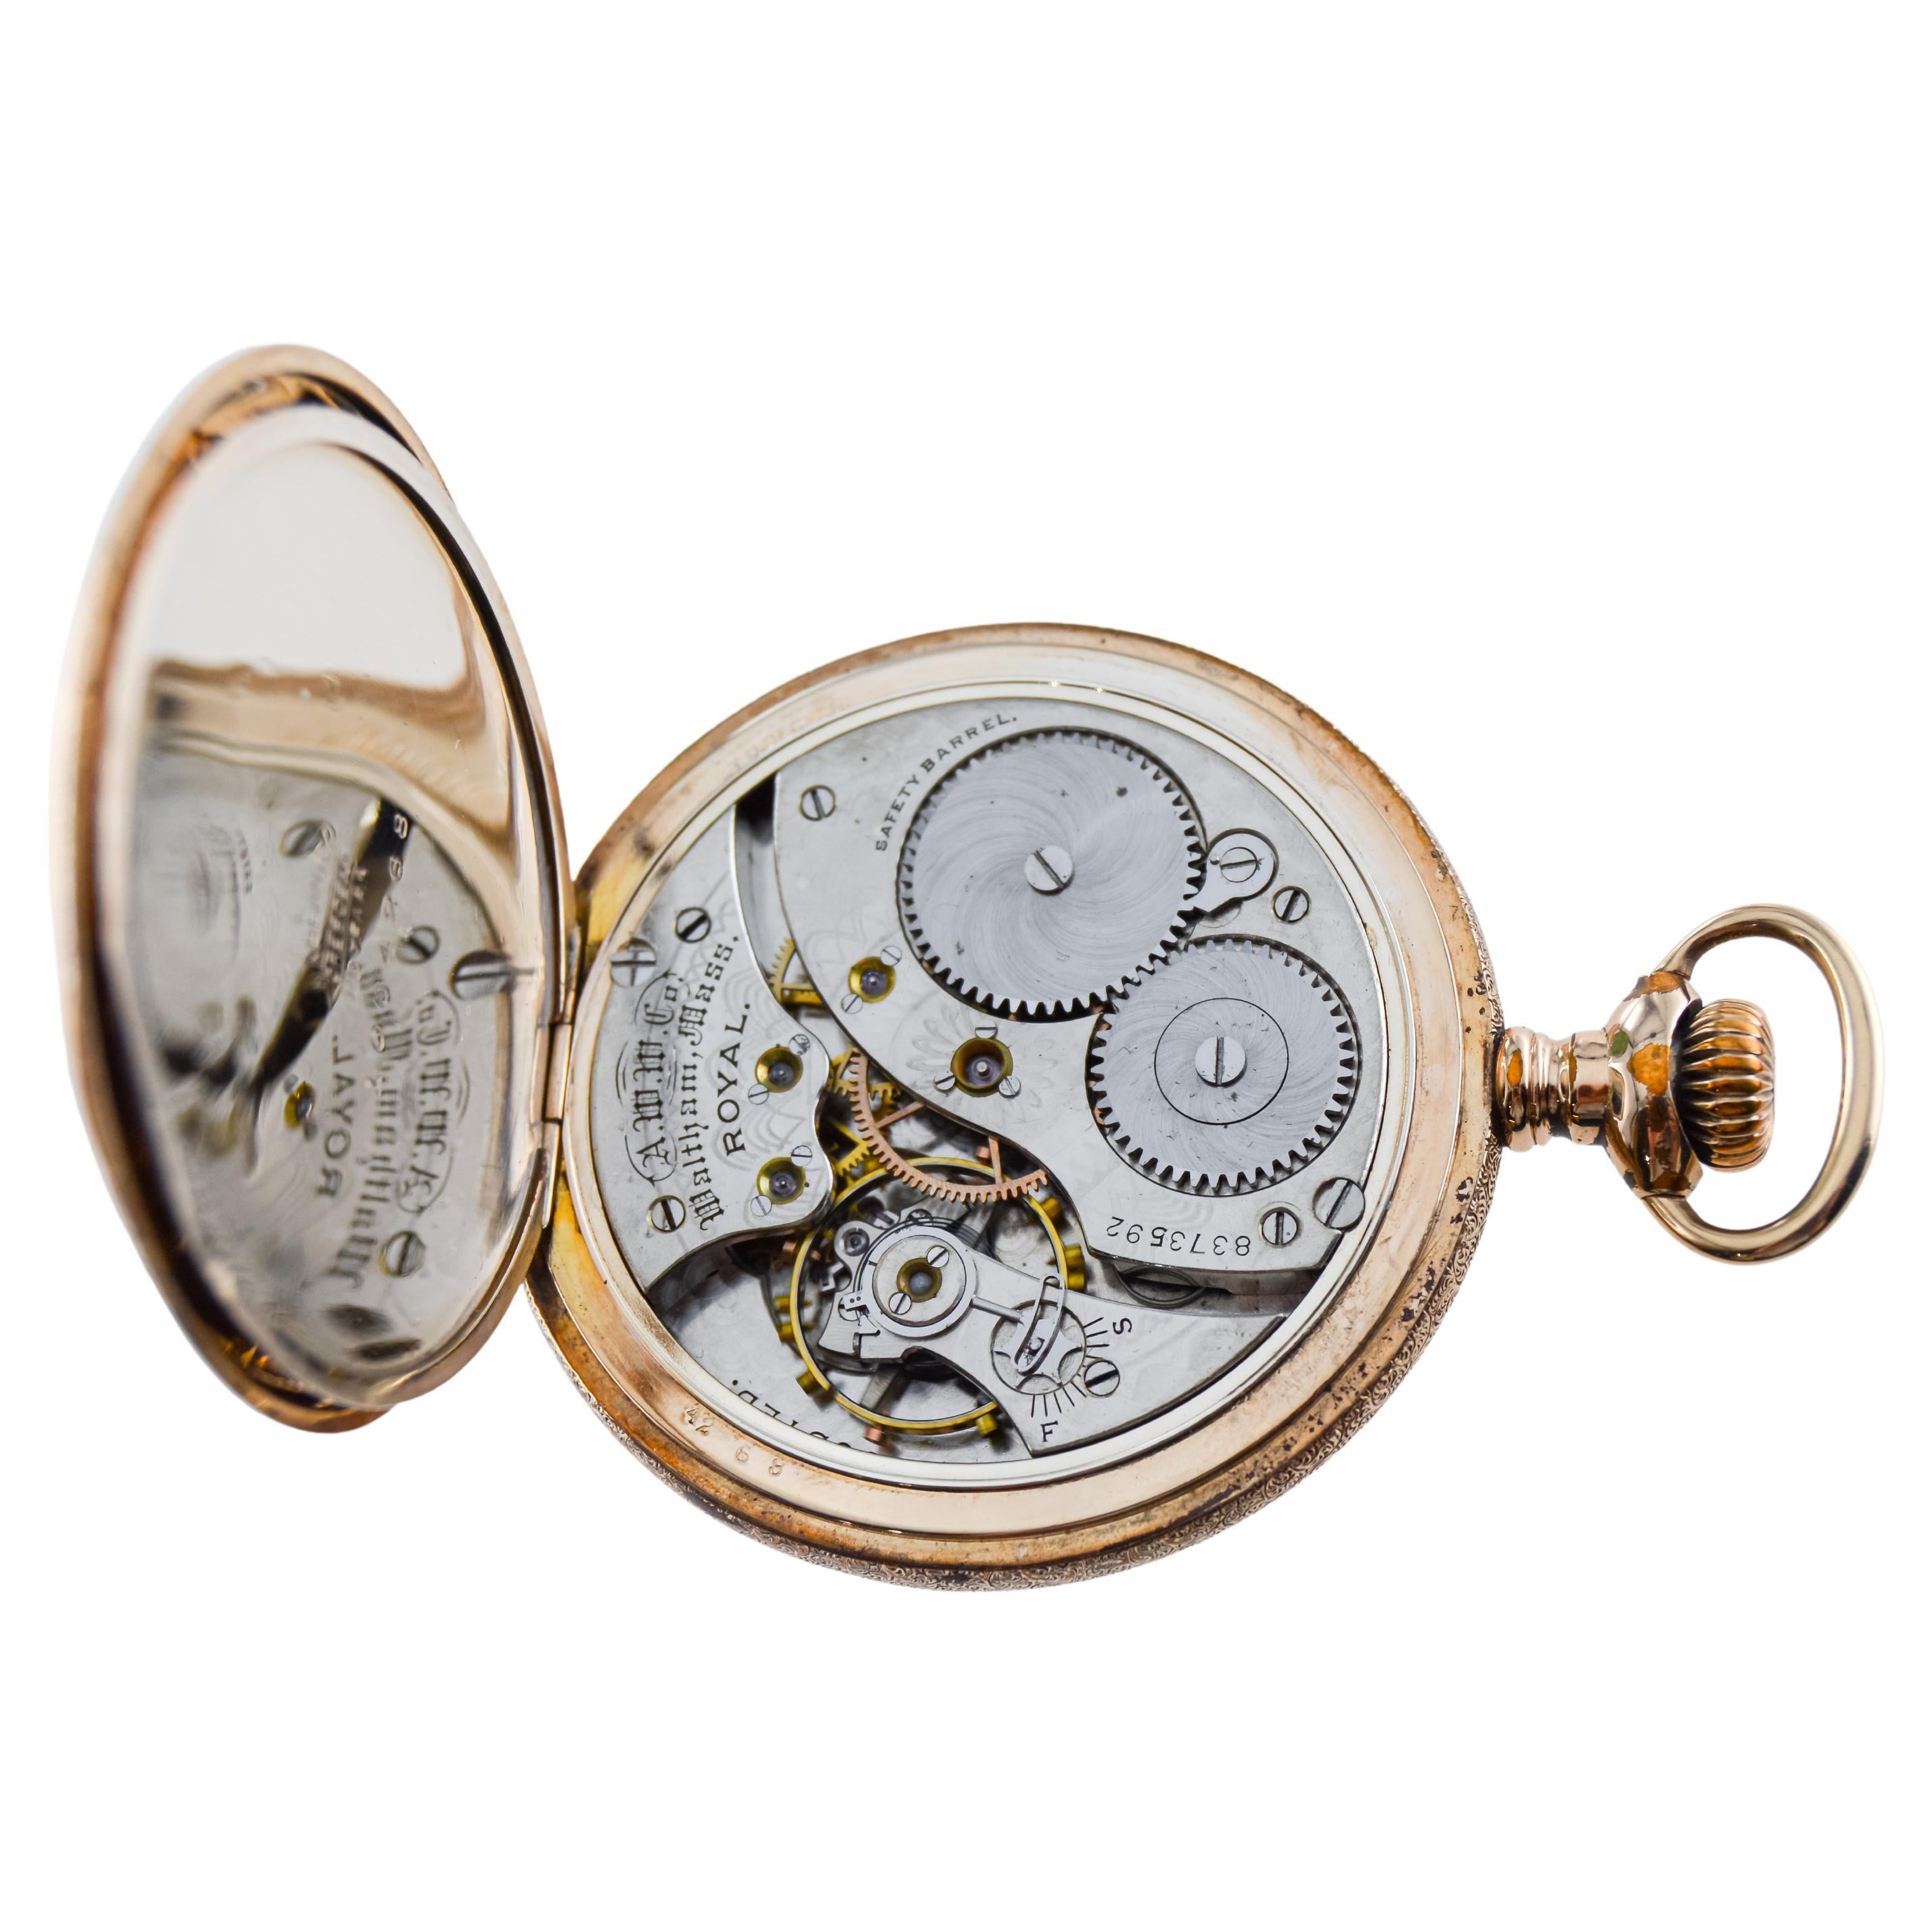 Waltham Yellow Gold Filled Open Faced Pocket Watch with Enamel Dial from 1897 For Sale 6